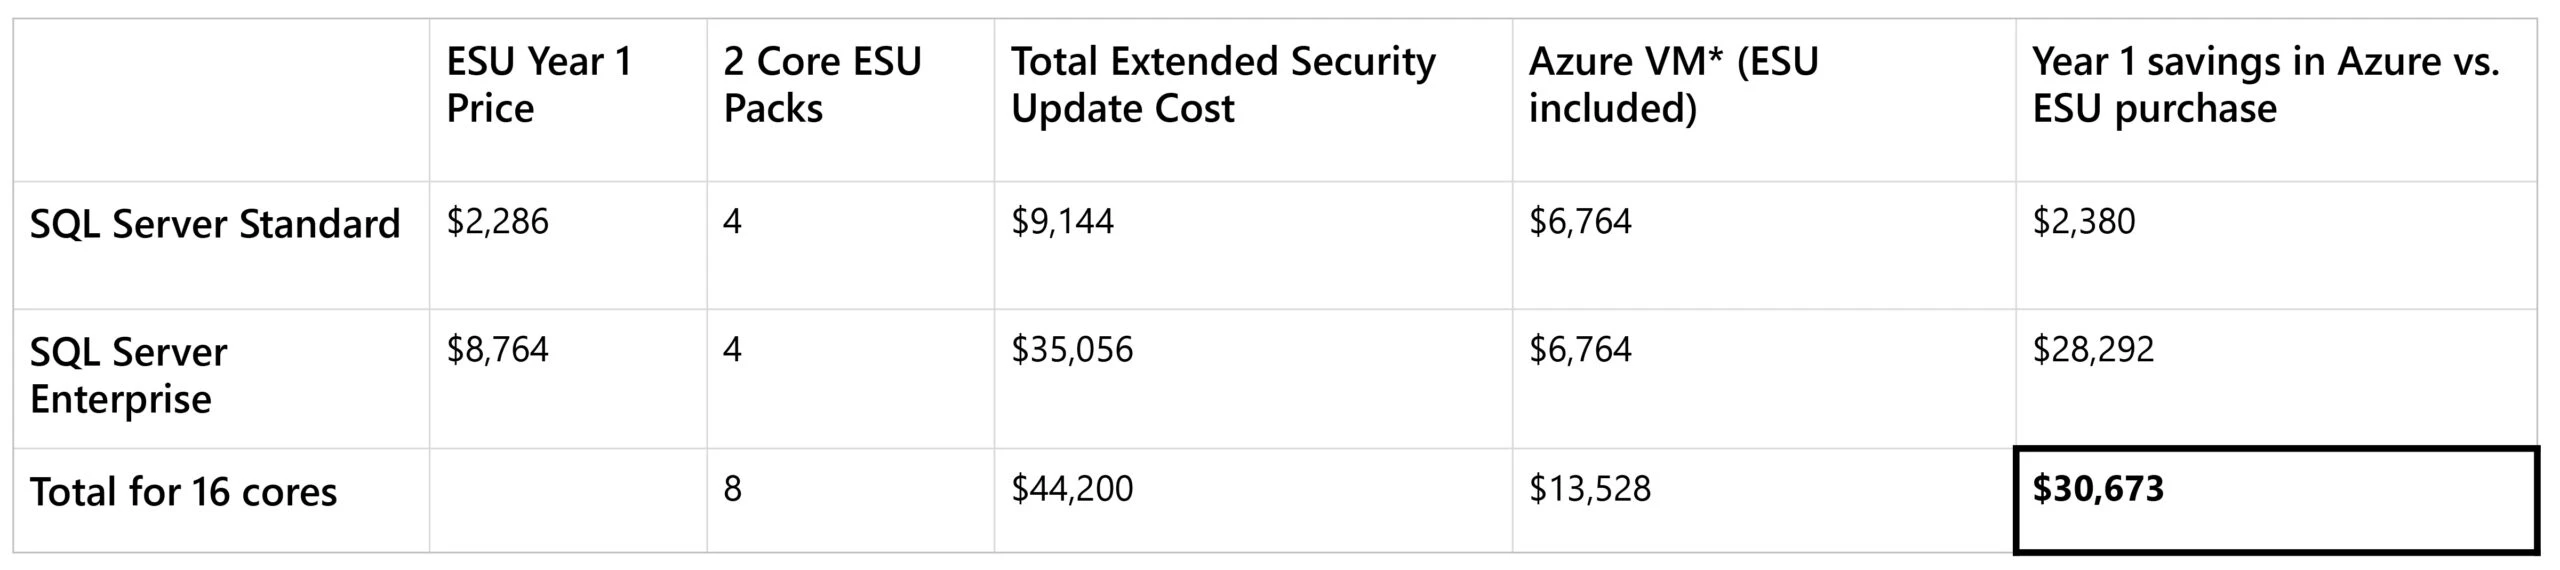 For a customer looking to protect 8 cores of SQL Server 2012 Standard edition and 8 cores of SQL Server 2012 Enterprise edition on-premises, the total cost is $44,200 for the first year. If this customer choses to move their Windows Server and SQL Server licenses to Azure instead using Azure Hybrid Benefit, they could pay only $13,528 in Azure VM compute costs and get Extended Security Updates for free! This is a saving of $30,673 over staying on-premises and paying for Extended Security Updates.